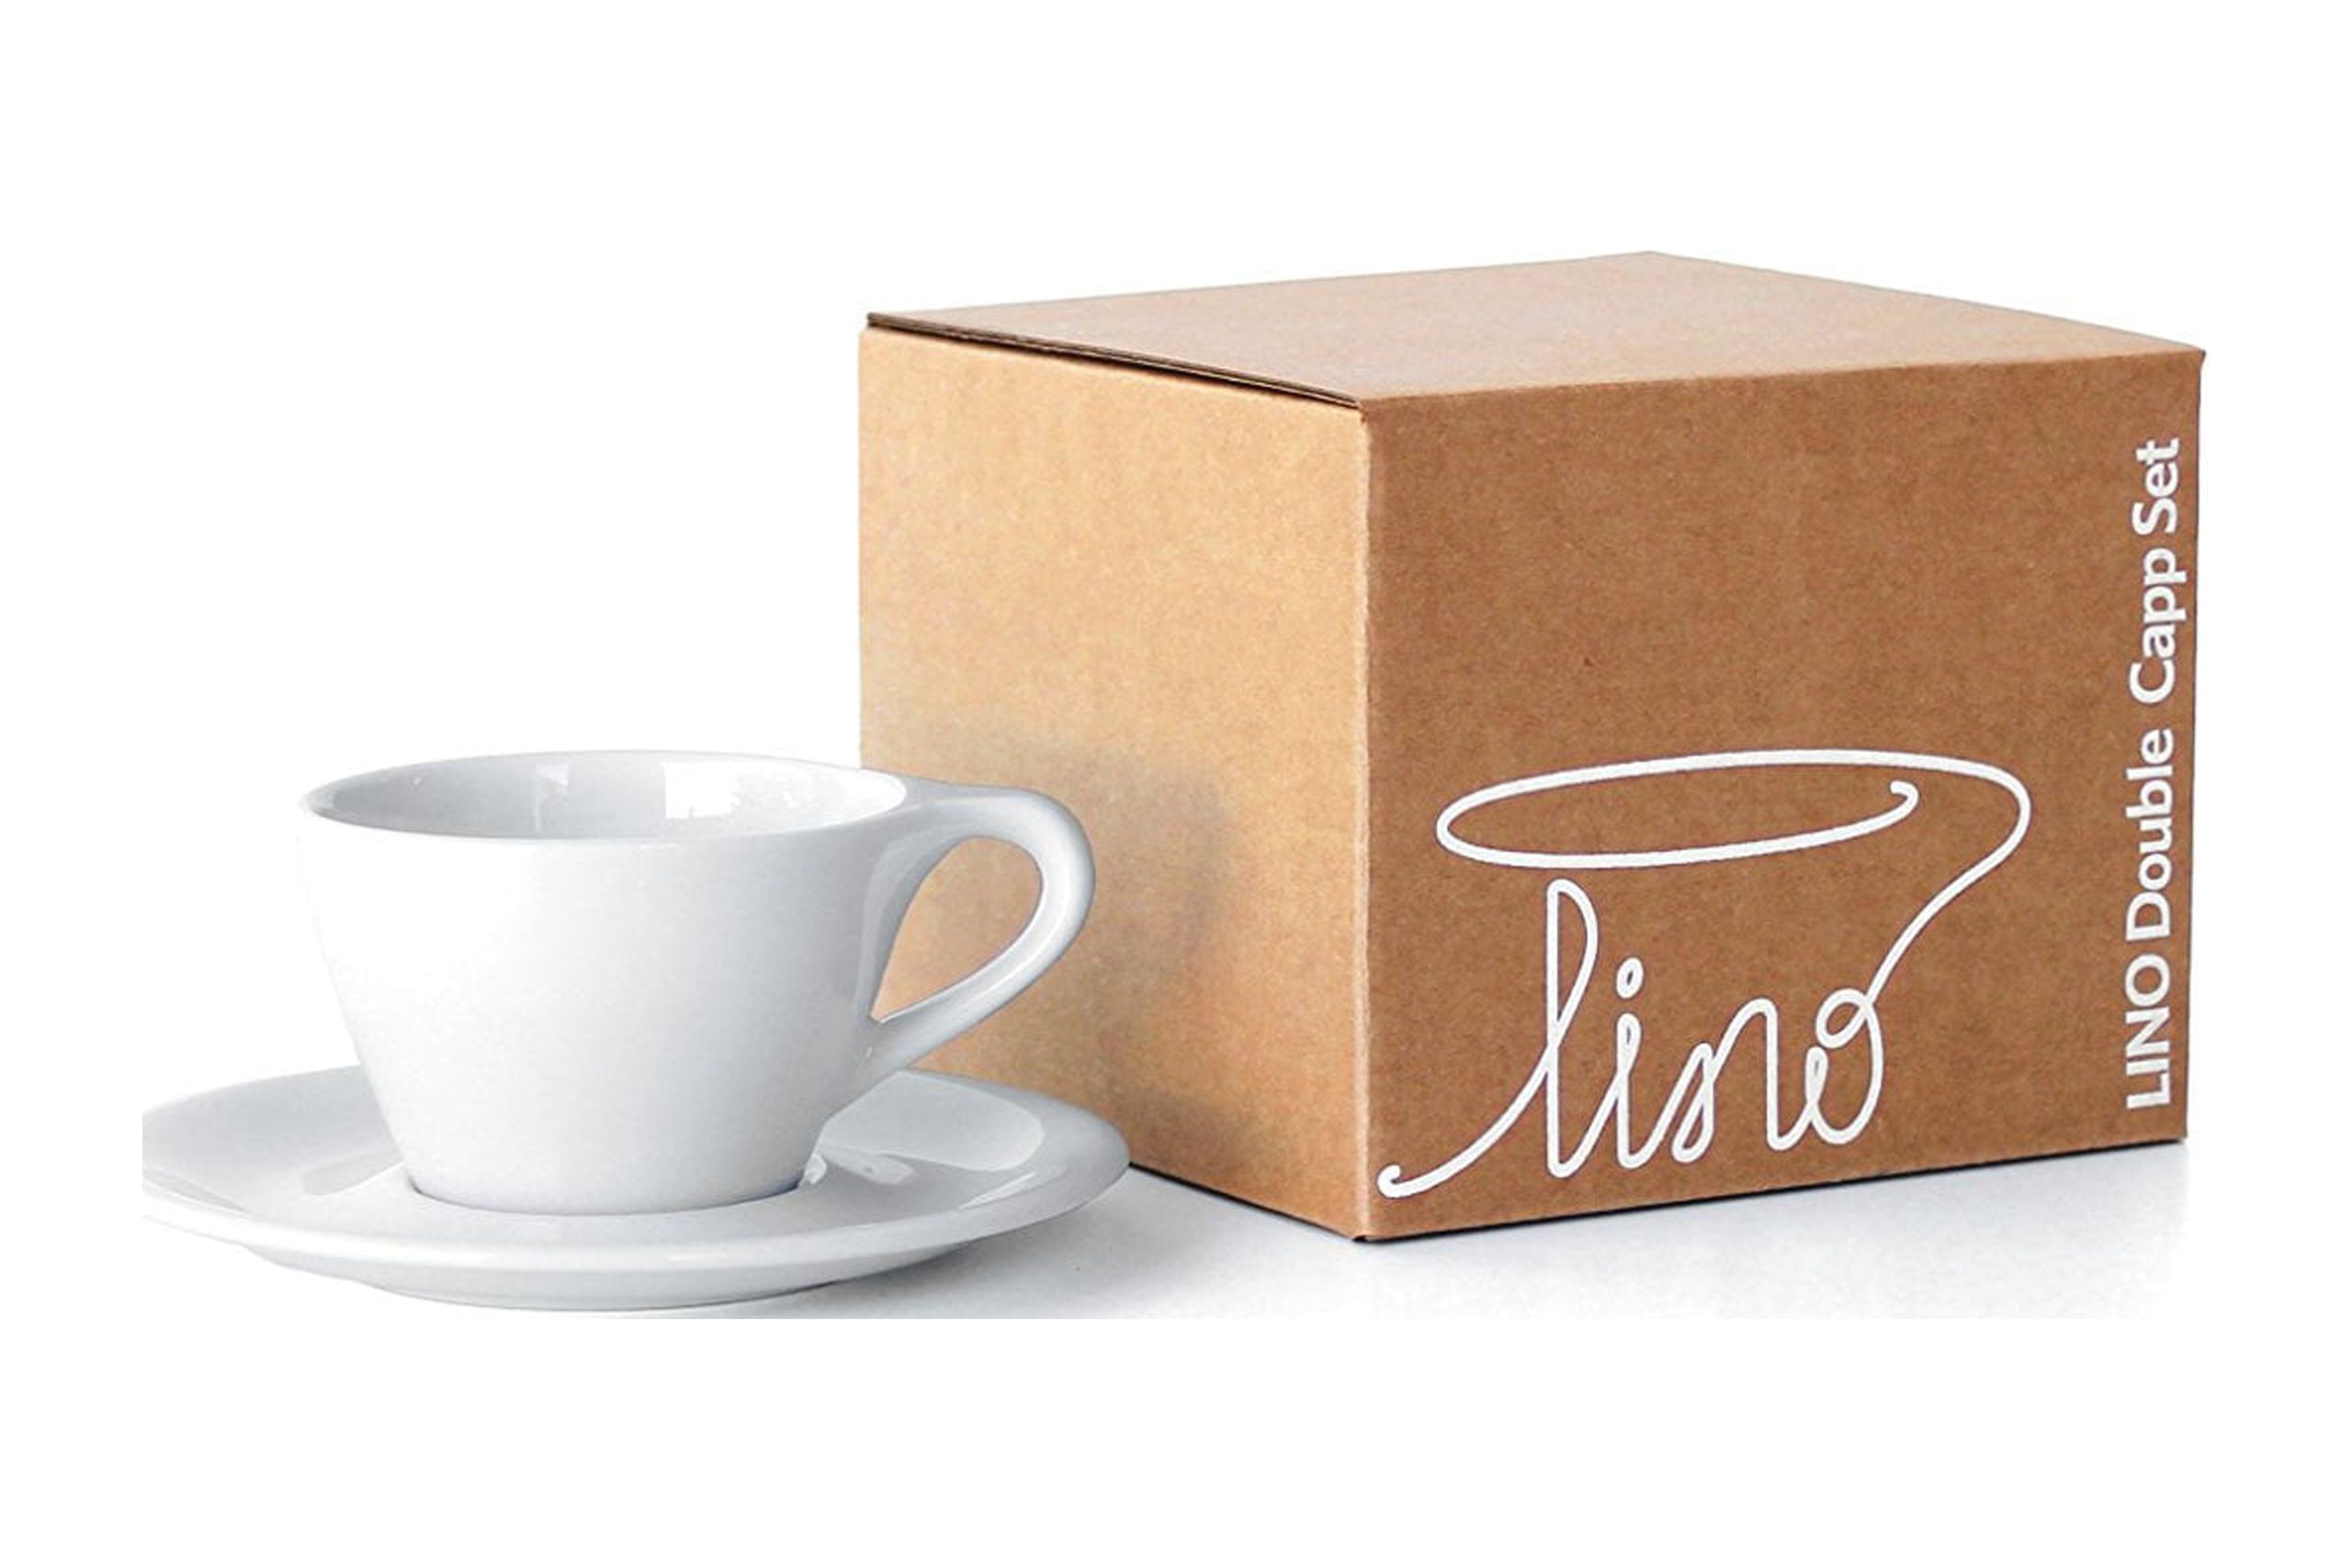 Custom Espresso Cups with Saucer 2.75 oz. Set of 10, Personalized Bulk Pack  - Perfect for Espresso, Tea, Other Beverages - White